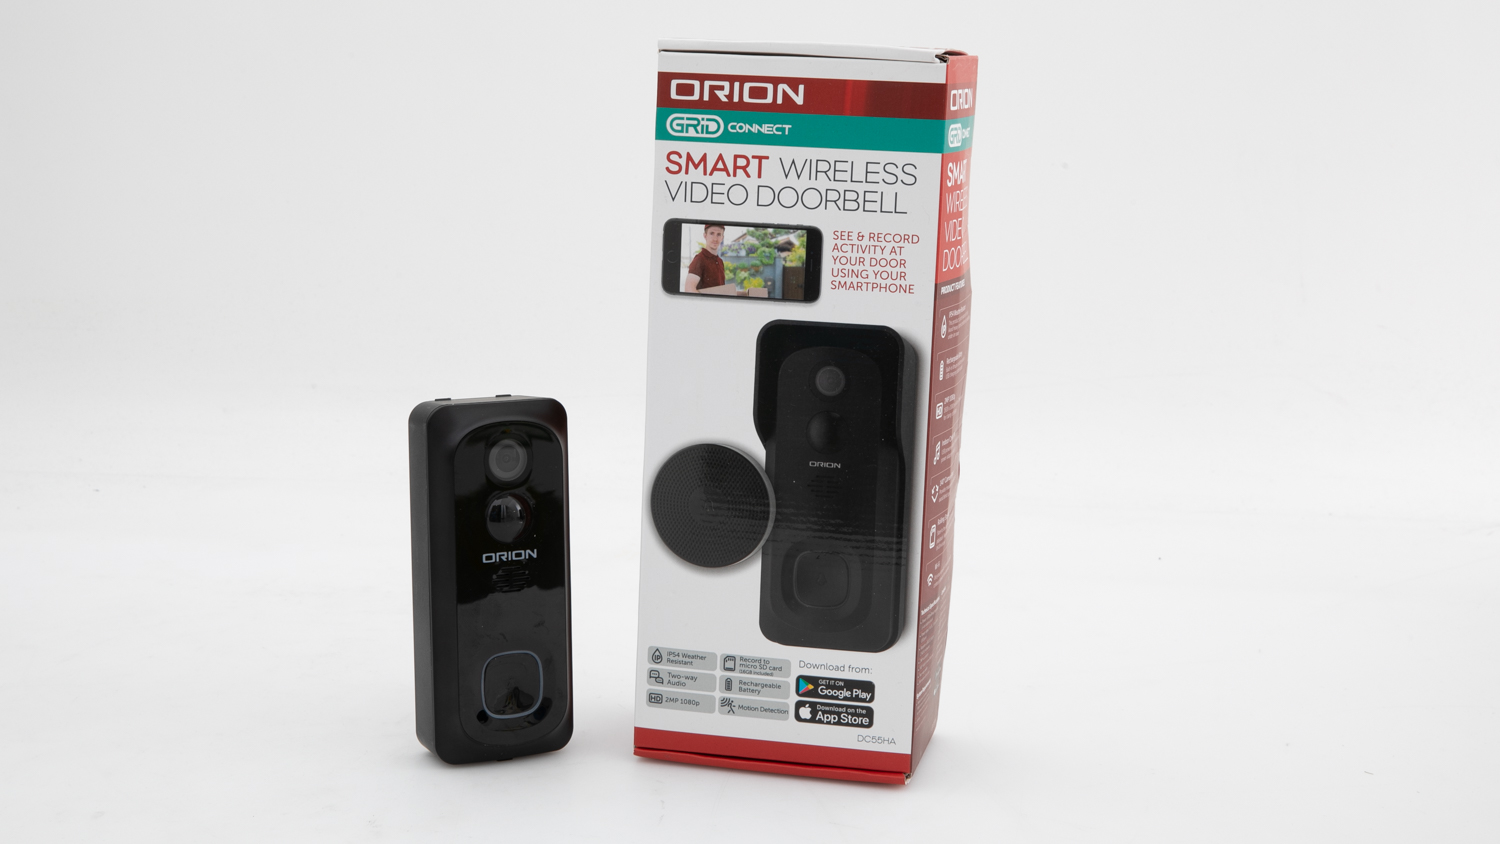 Orion Grid Connect Smart Wireless Video Doorbell carousel image